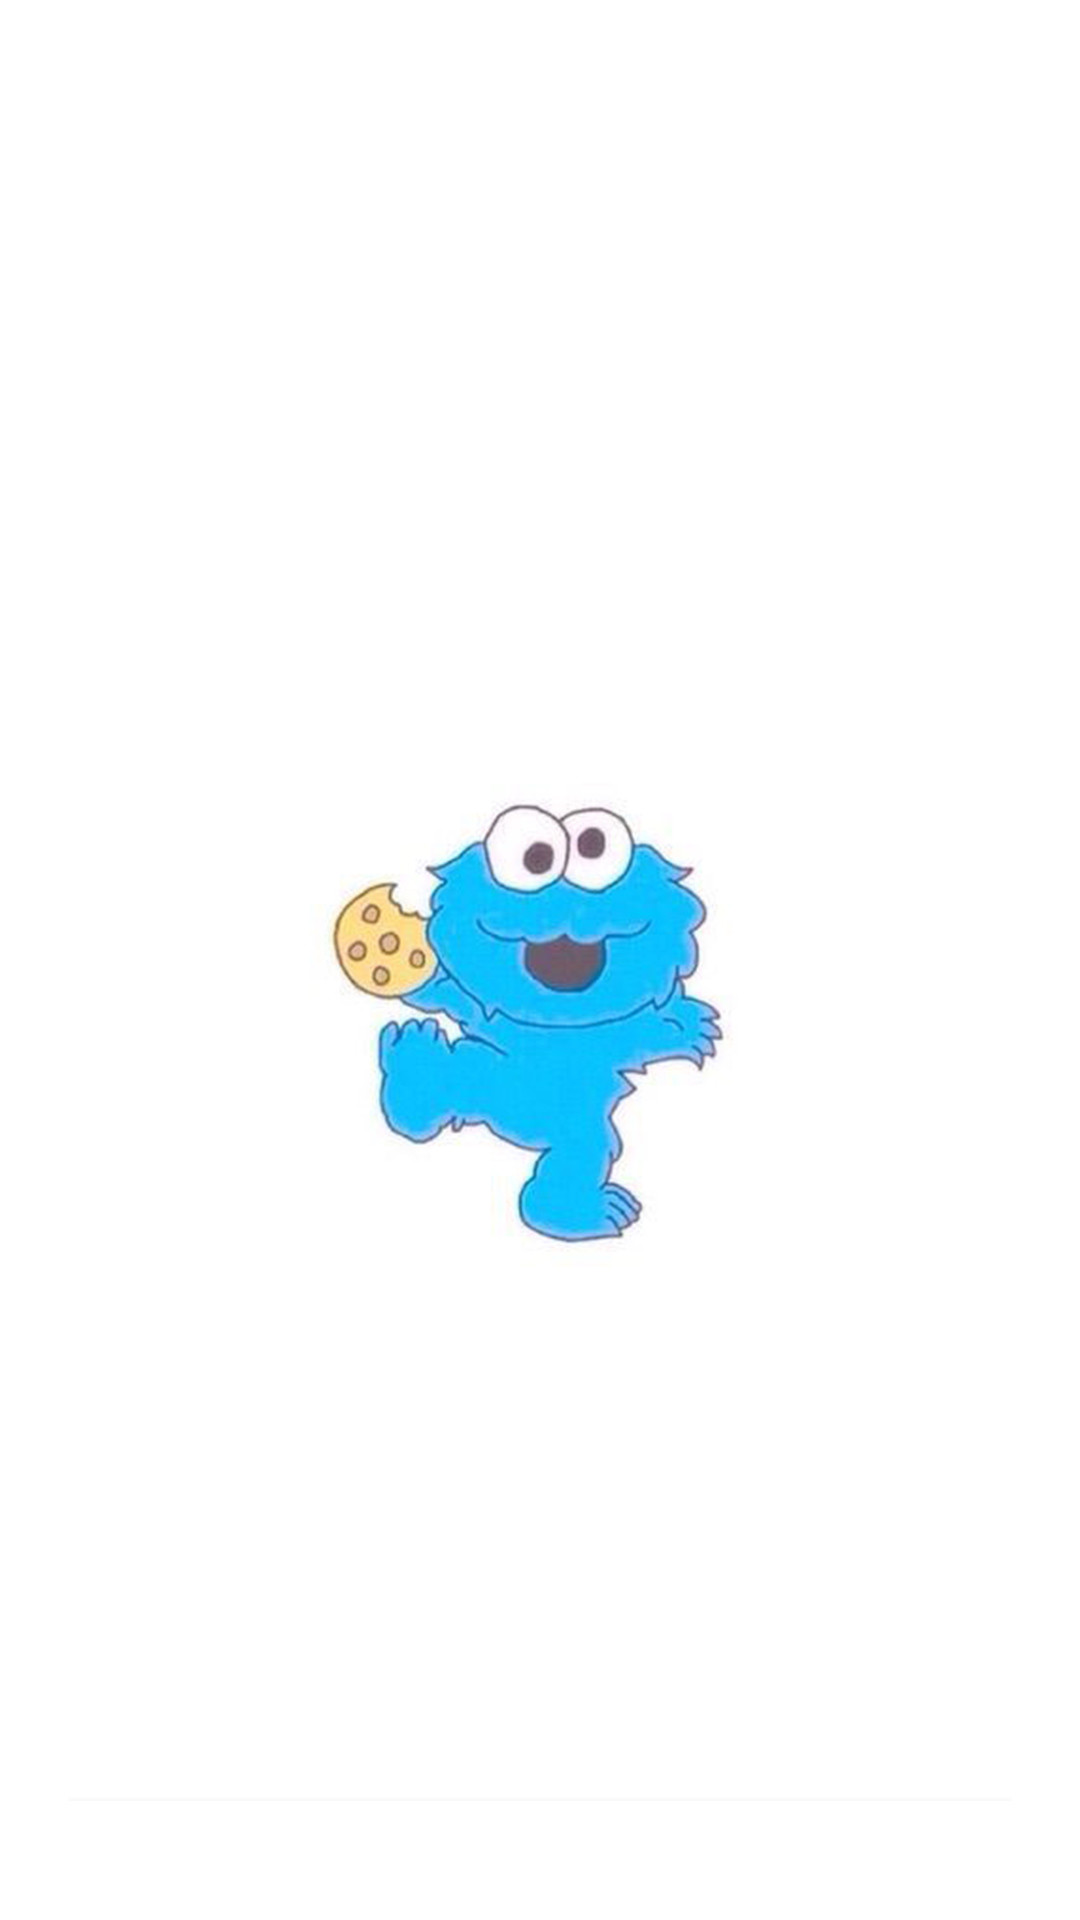 cookie monster iphone wallpaper,turquoise,blue,turquoise,aqua,fashion accessory